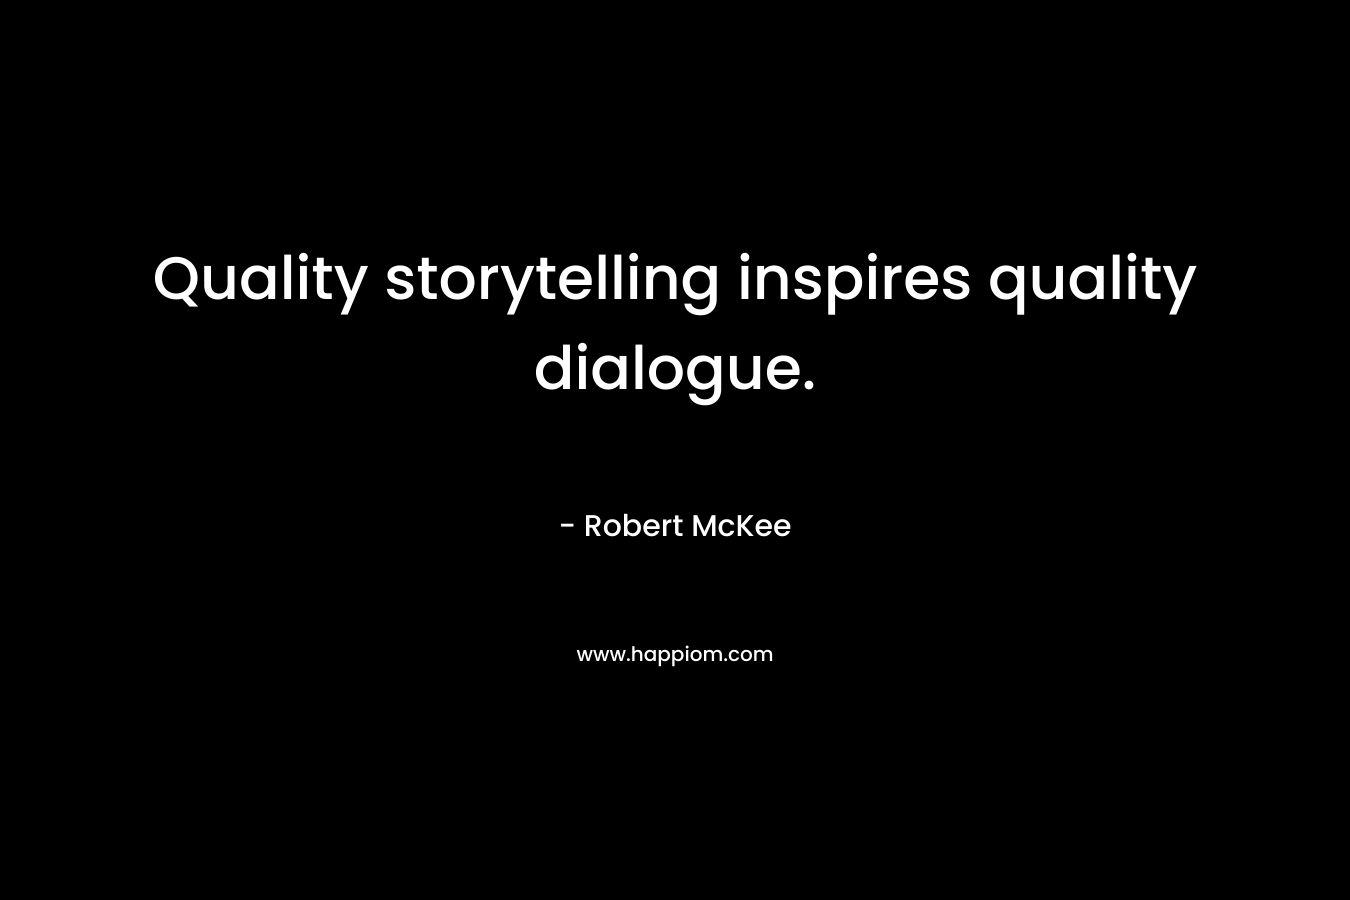 Quality storytelling inspires quality dialogue. – Robert McKee